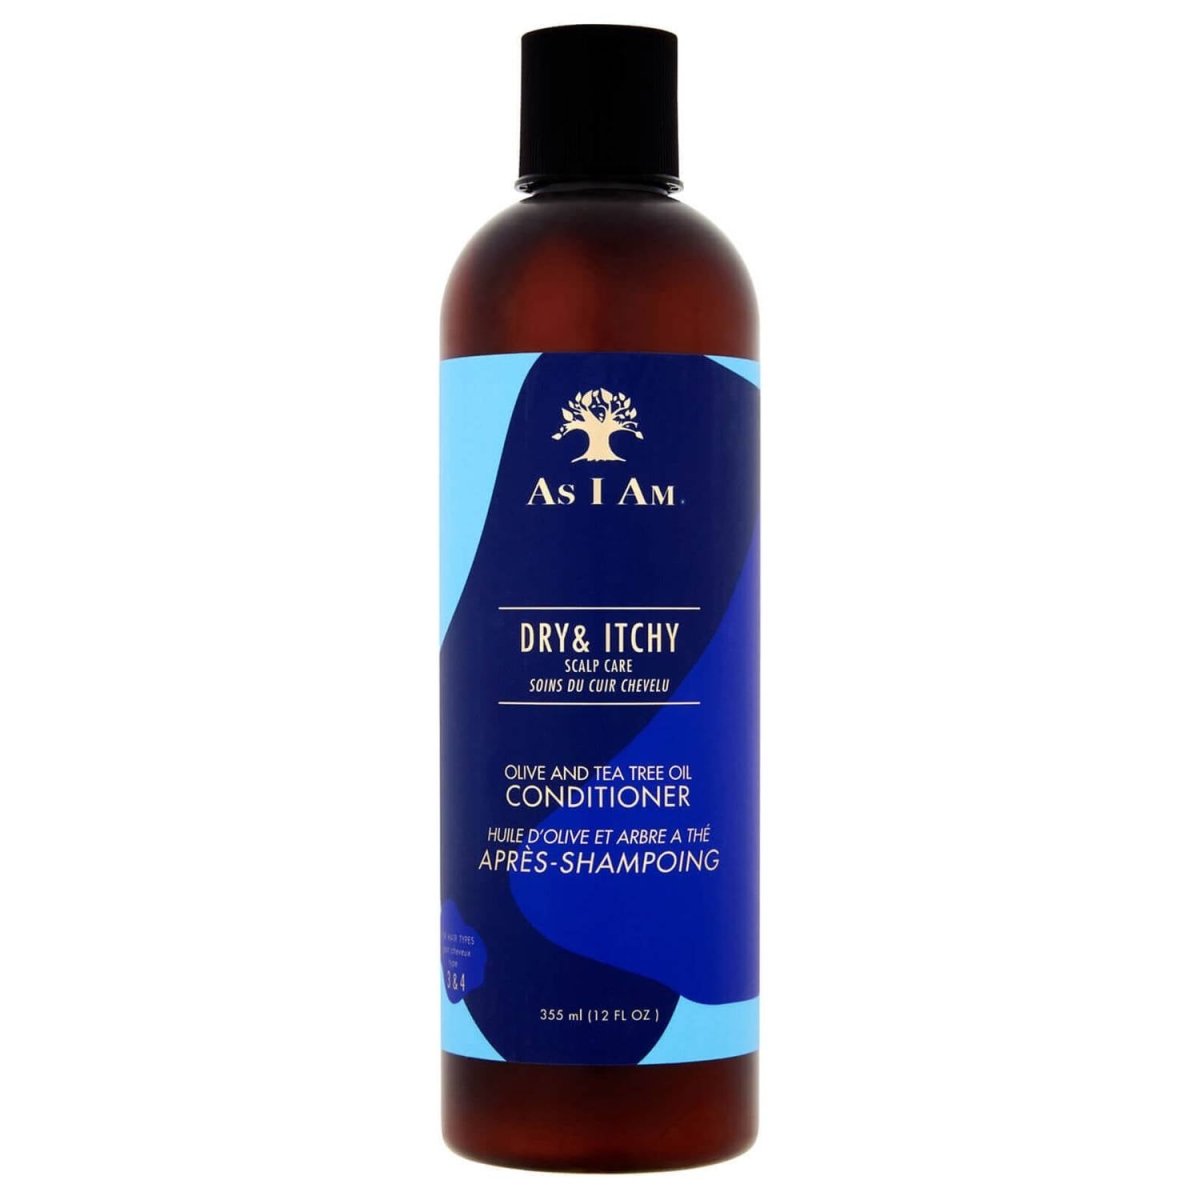 As I Am Dry and Itchy Scalp Care Olive and Tea Tree Oil Conditioner 12oz - Southwestsix Cosmetics As I Am Dry and Itchy Scalp Care Olive and Tea Tree Oil Conditioner 12oz Conditioner As I Am Southwestsix Cosmetics As I Am Dry and Itchy Scalp Care Olive and Tea Tree Oil Conditioner 12oz